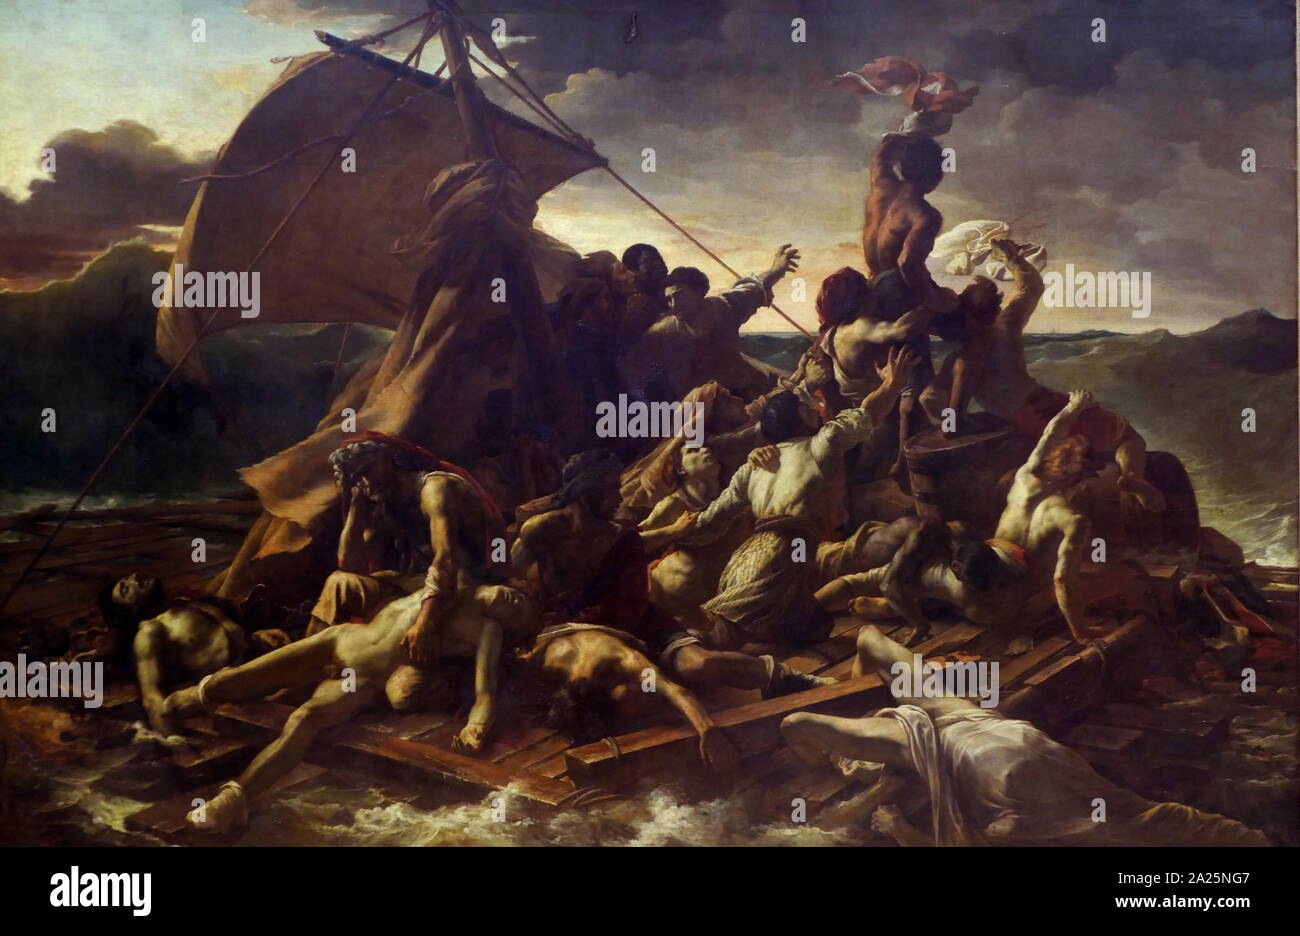 Painting titled 'The Raft of the Medusa' by Theodore Gericault. Theodore Gericault (1791-1824) a French painter and lithographer. Stock Photo